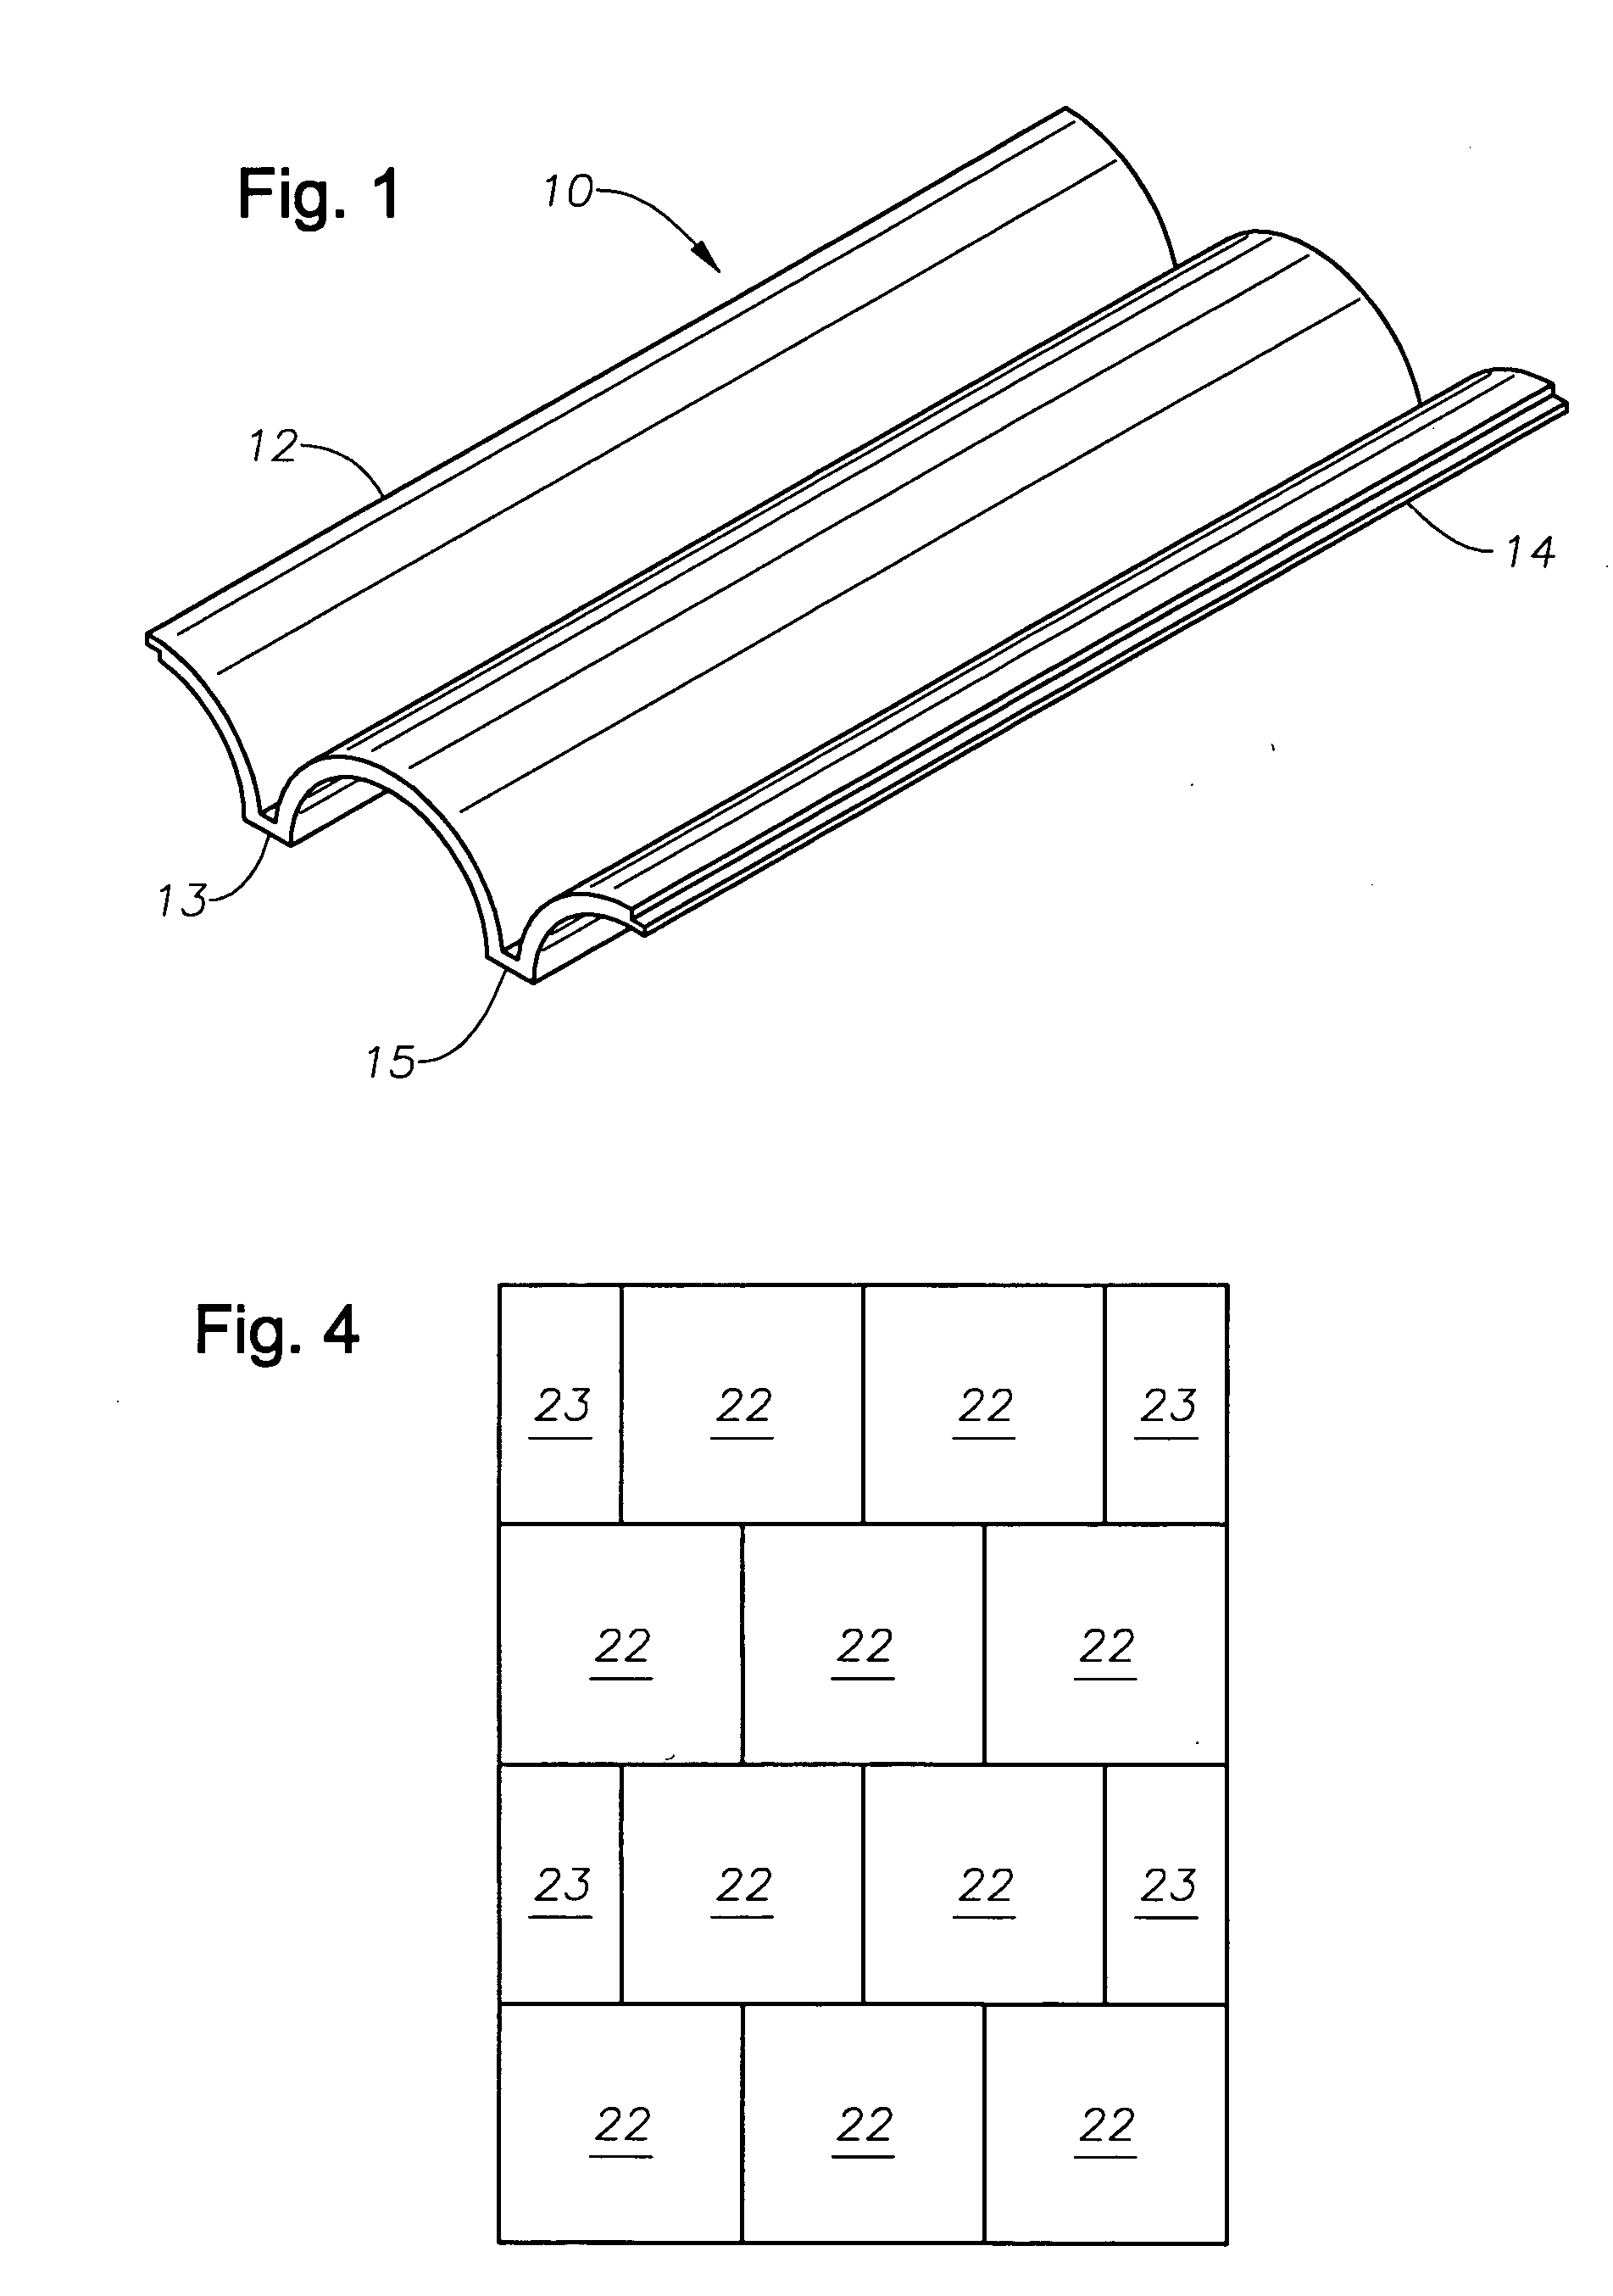 Insulated pitched roof system and method of installing same